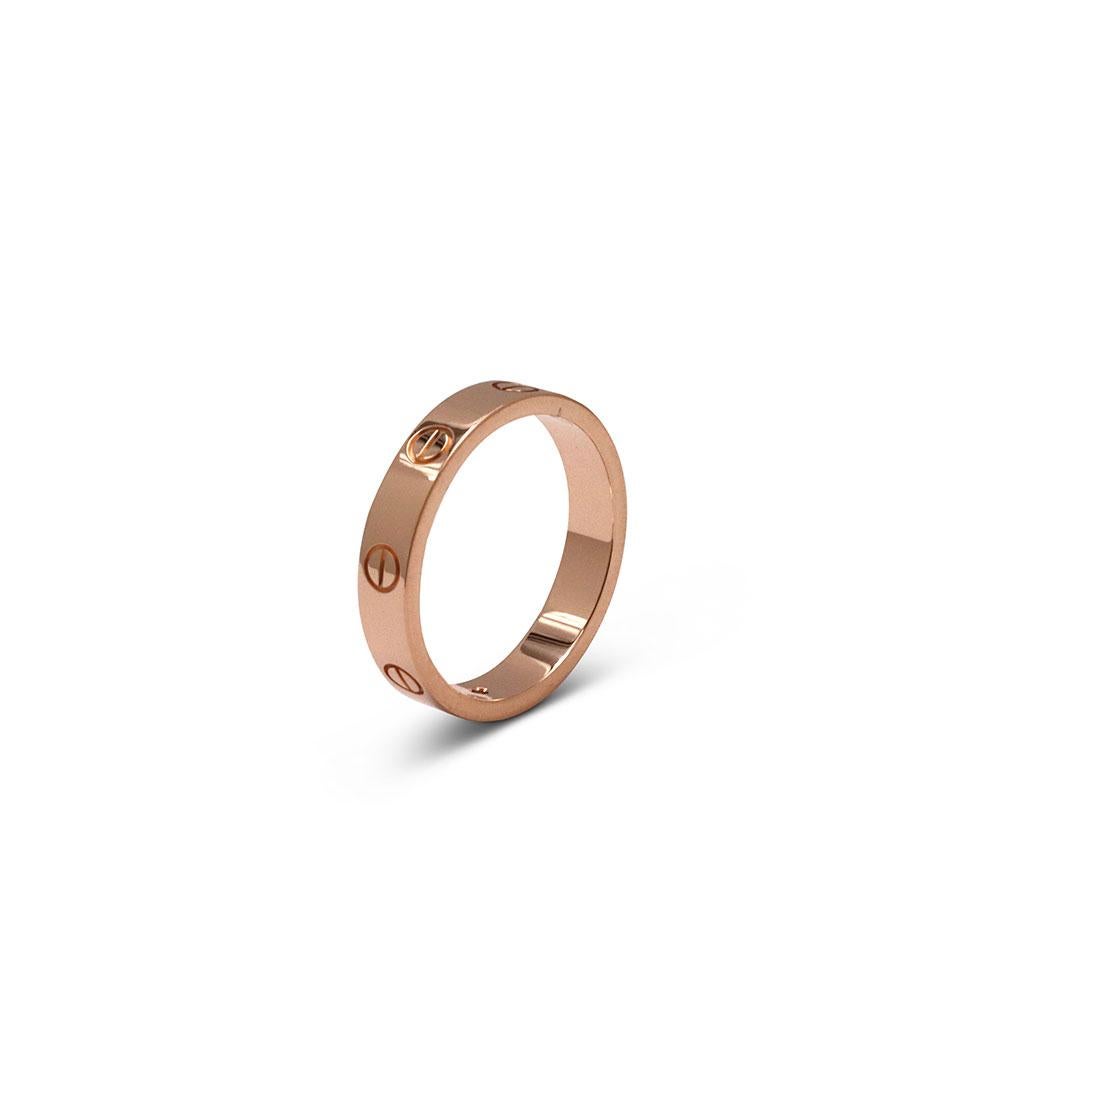 Authentic Cartier 'Love' wedding band crafted in 18 karat rose gold features one round brilliant cut diamond with an estimated 0.02 carat total weight. Signed Cartier, Au750, 56, with serial number and hallmarks. Size 56, (US 7 1/2). The ring is